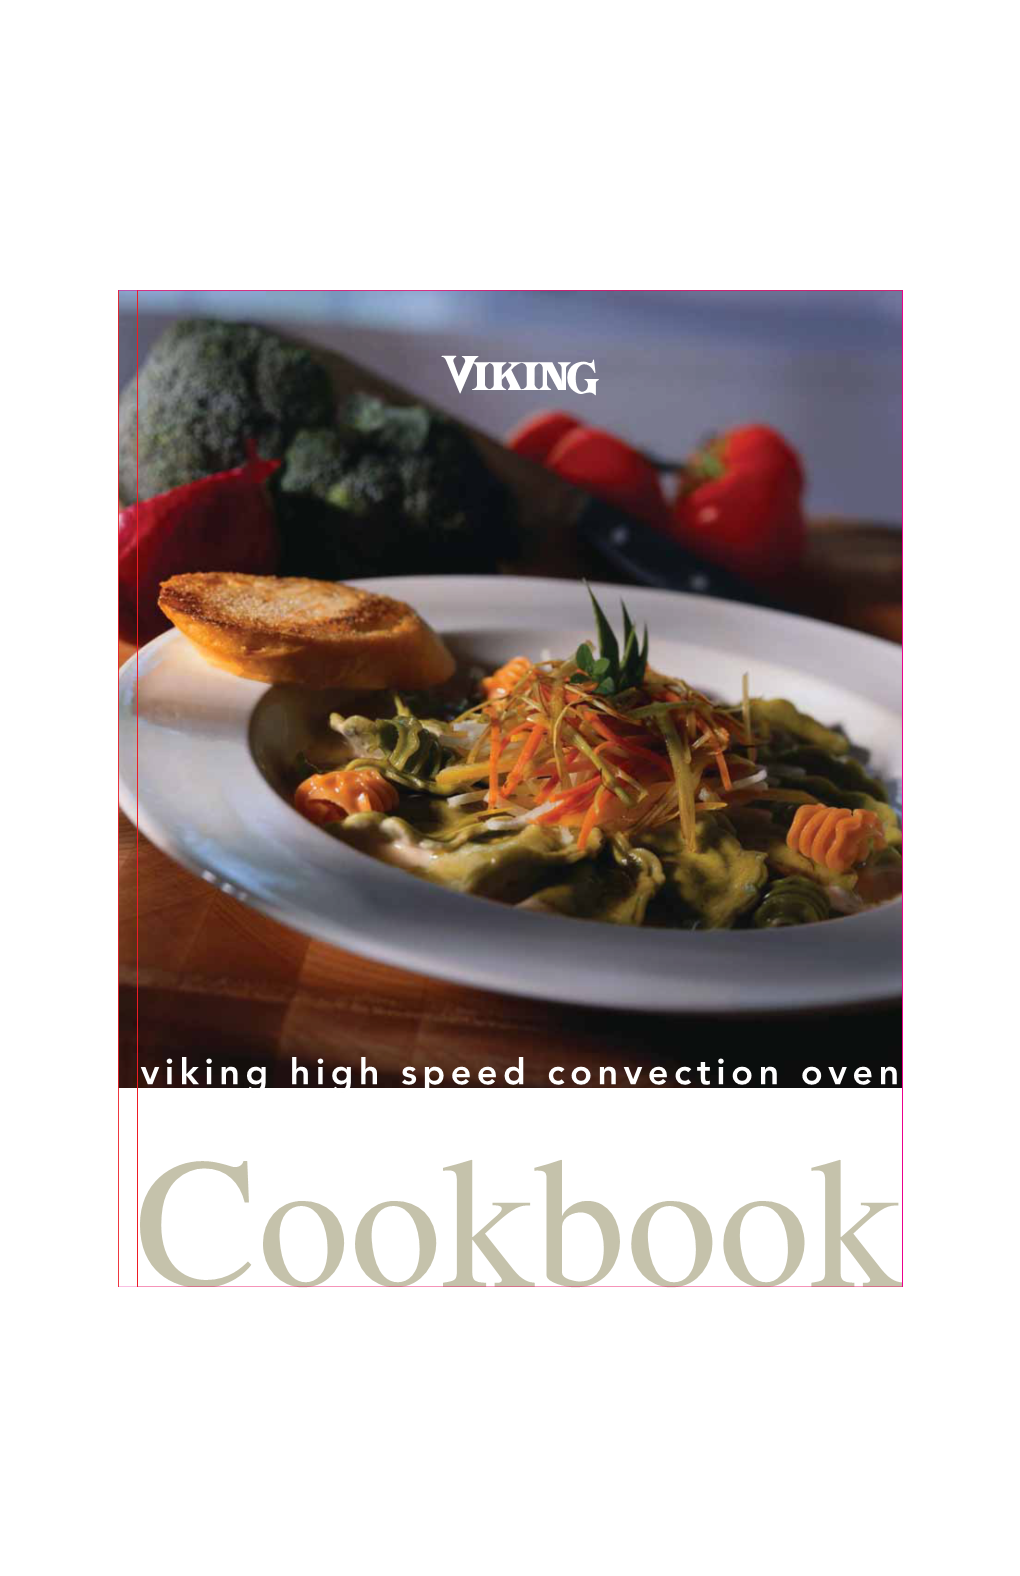 Viking High Speed Convection Oven PRECAUTIONS to AVOID POSSIBLE EXPOSURE to EXCESSIVE MICROWAVE ENERGY